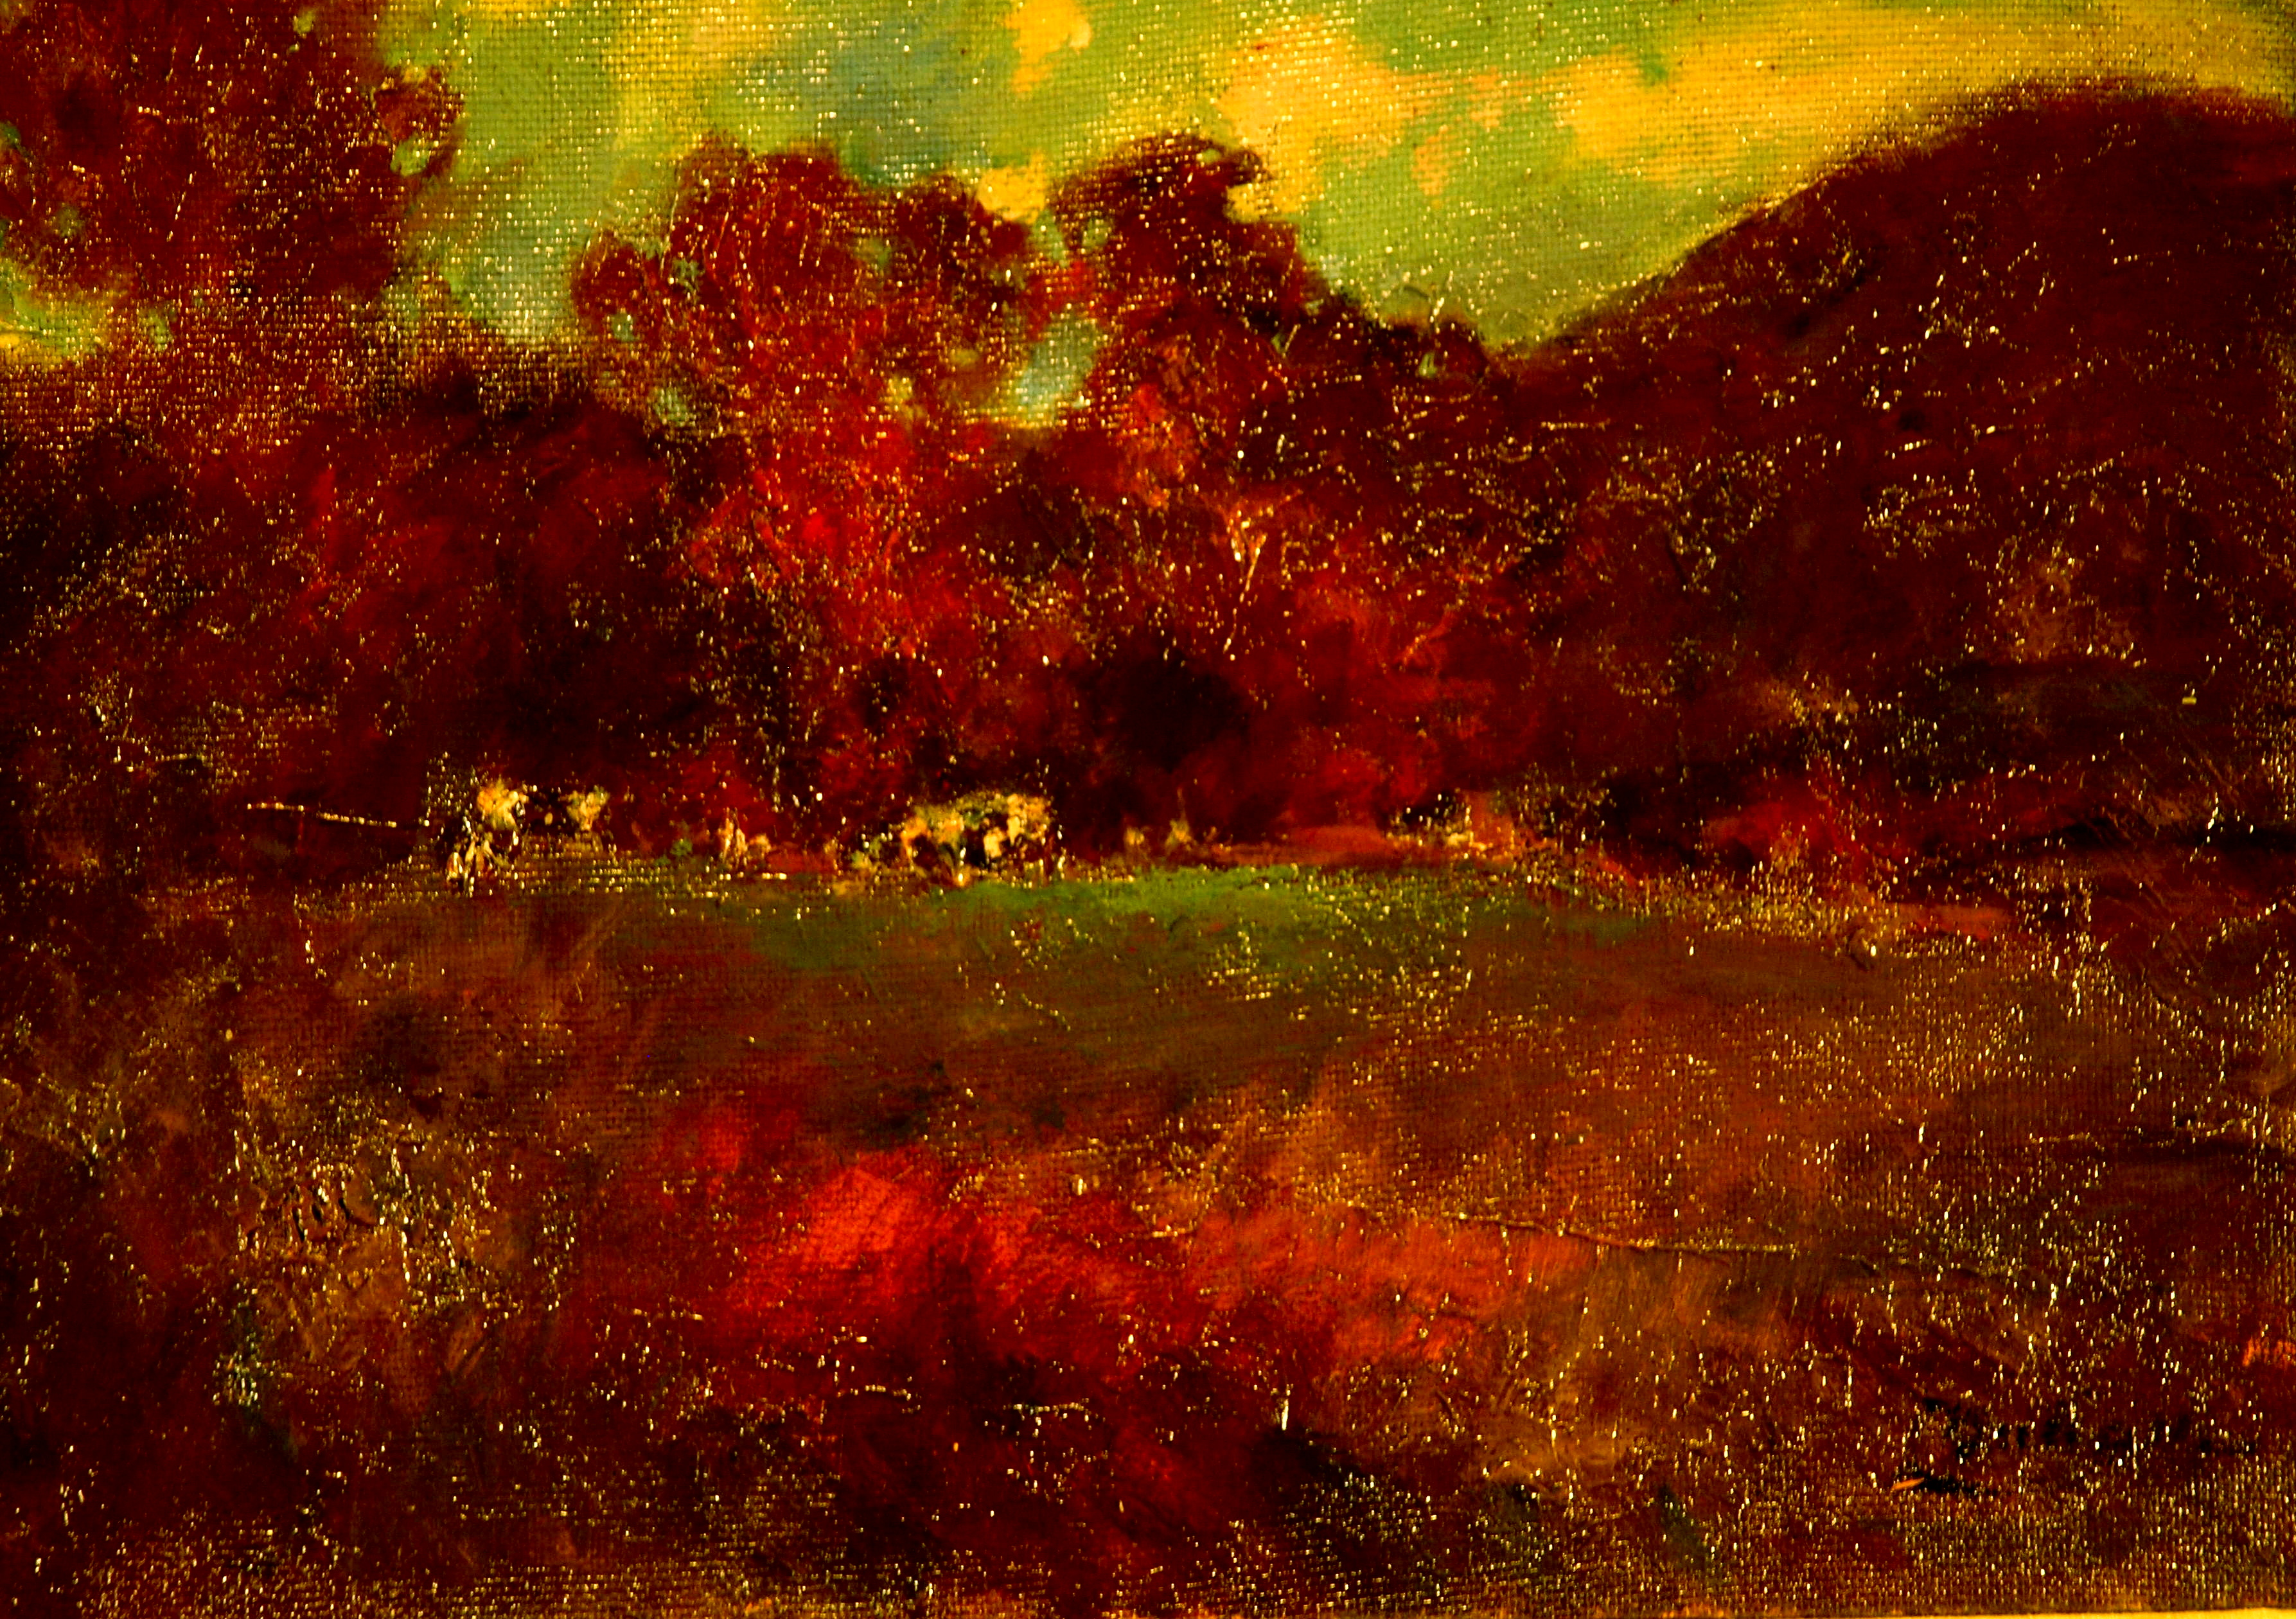 Cows in Fall Pasture, Oil on Panel, 12 x 16 Inches, by Bernard Lennon, $400